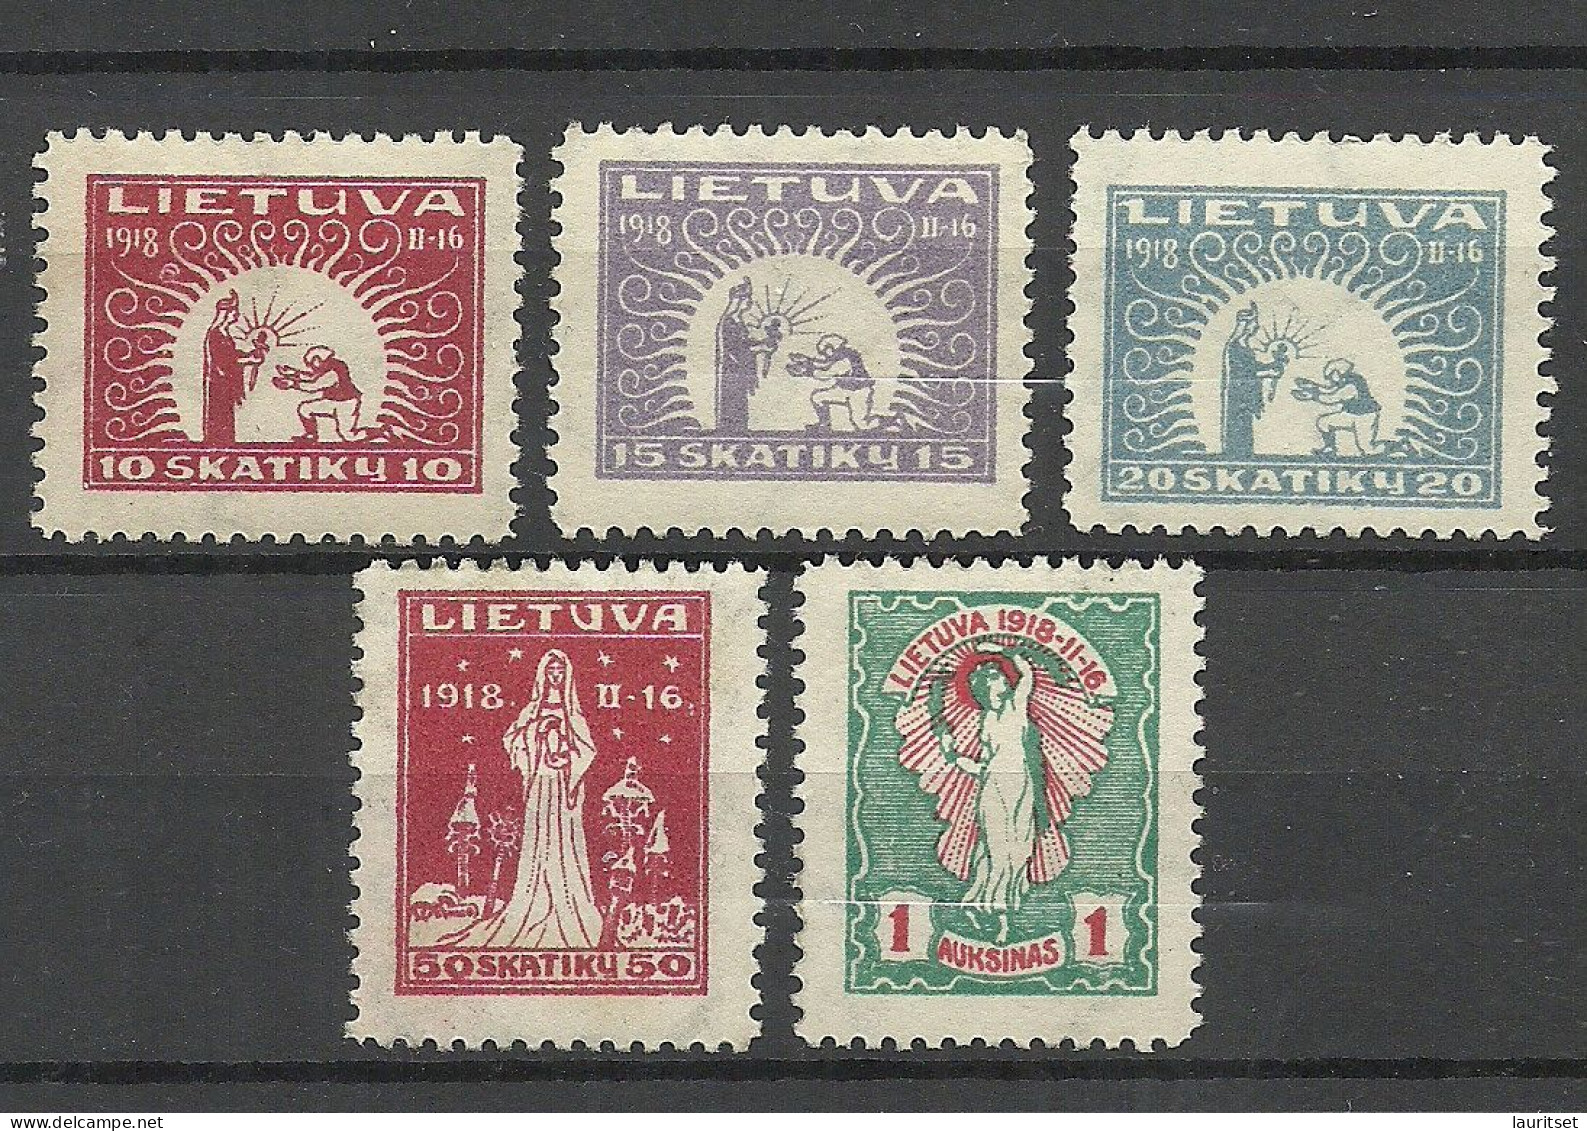 LITAUEN Lithuania 1920 = 5 Values From Set Michel 65 - 75 * - Lithuania